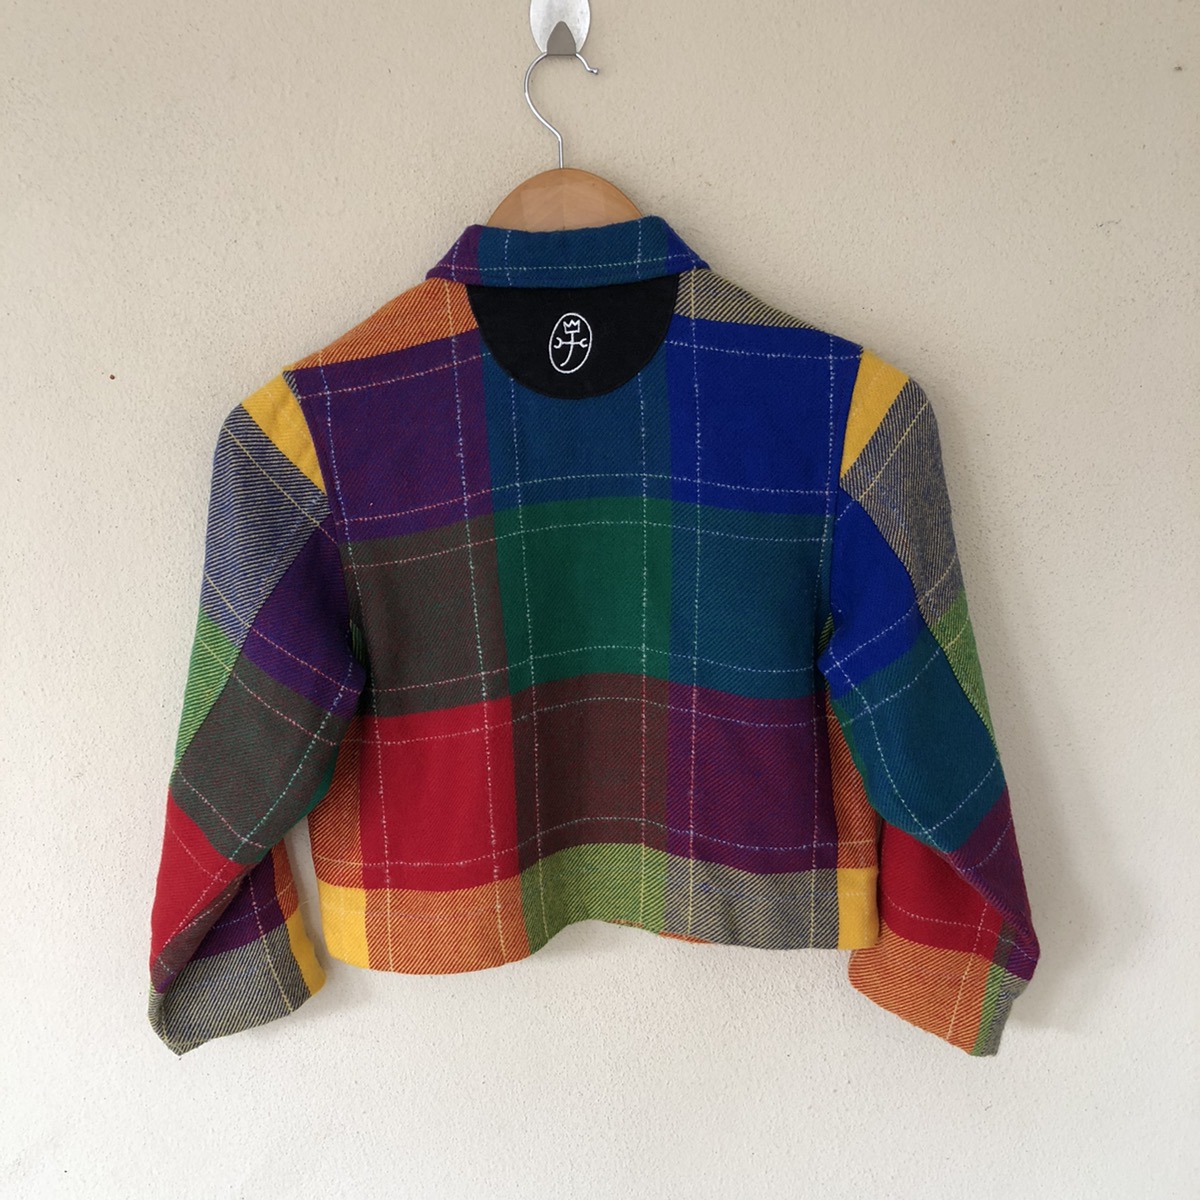 Louis Vuitton sweater. Worn once. Just don't have - Depop